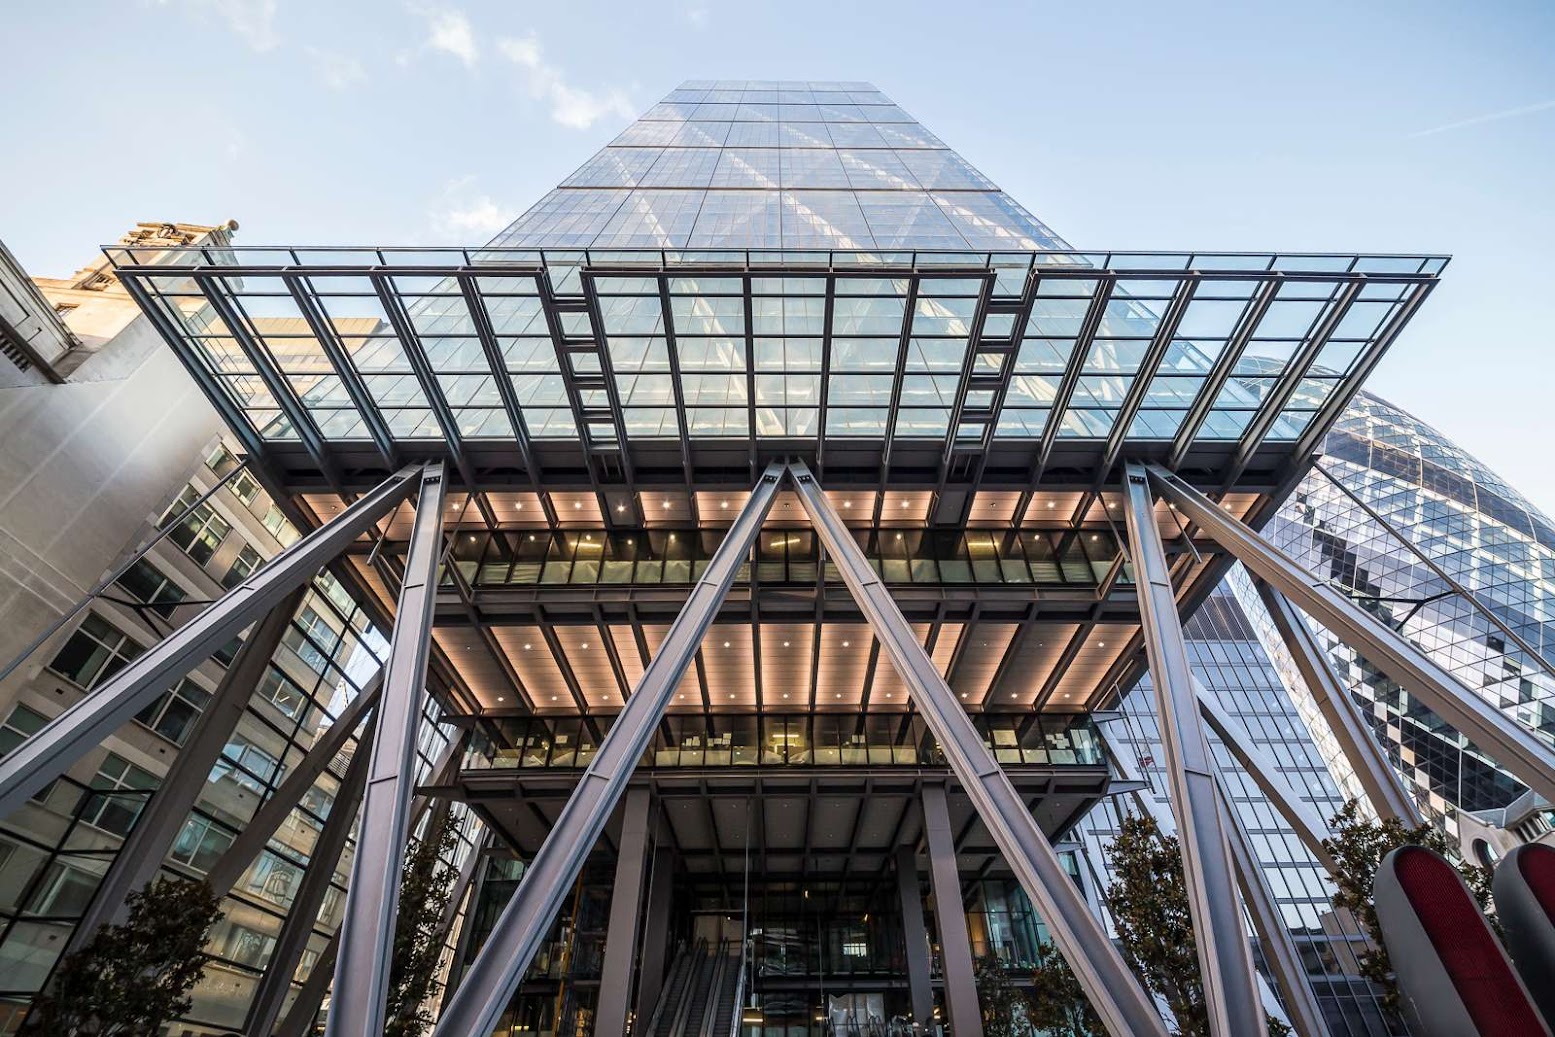 Londra, Regno Unito: [THE LEADENHALL BUILDING BY ROGERS STIRK HARBOUR + PARTNERS]